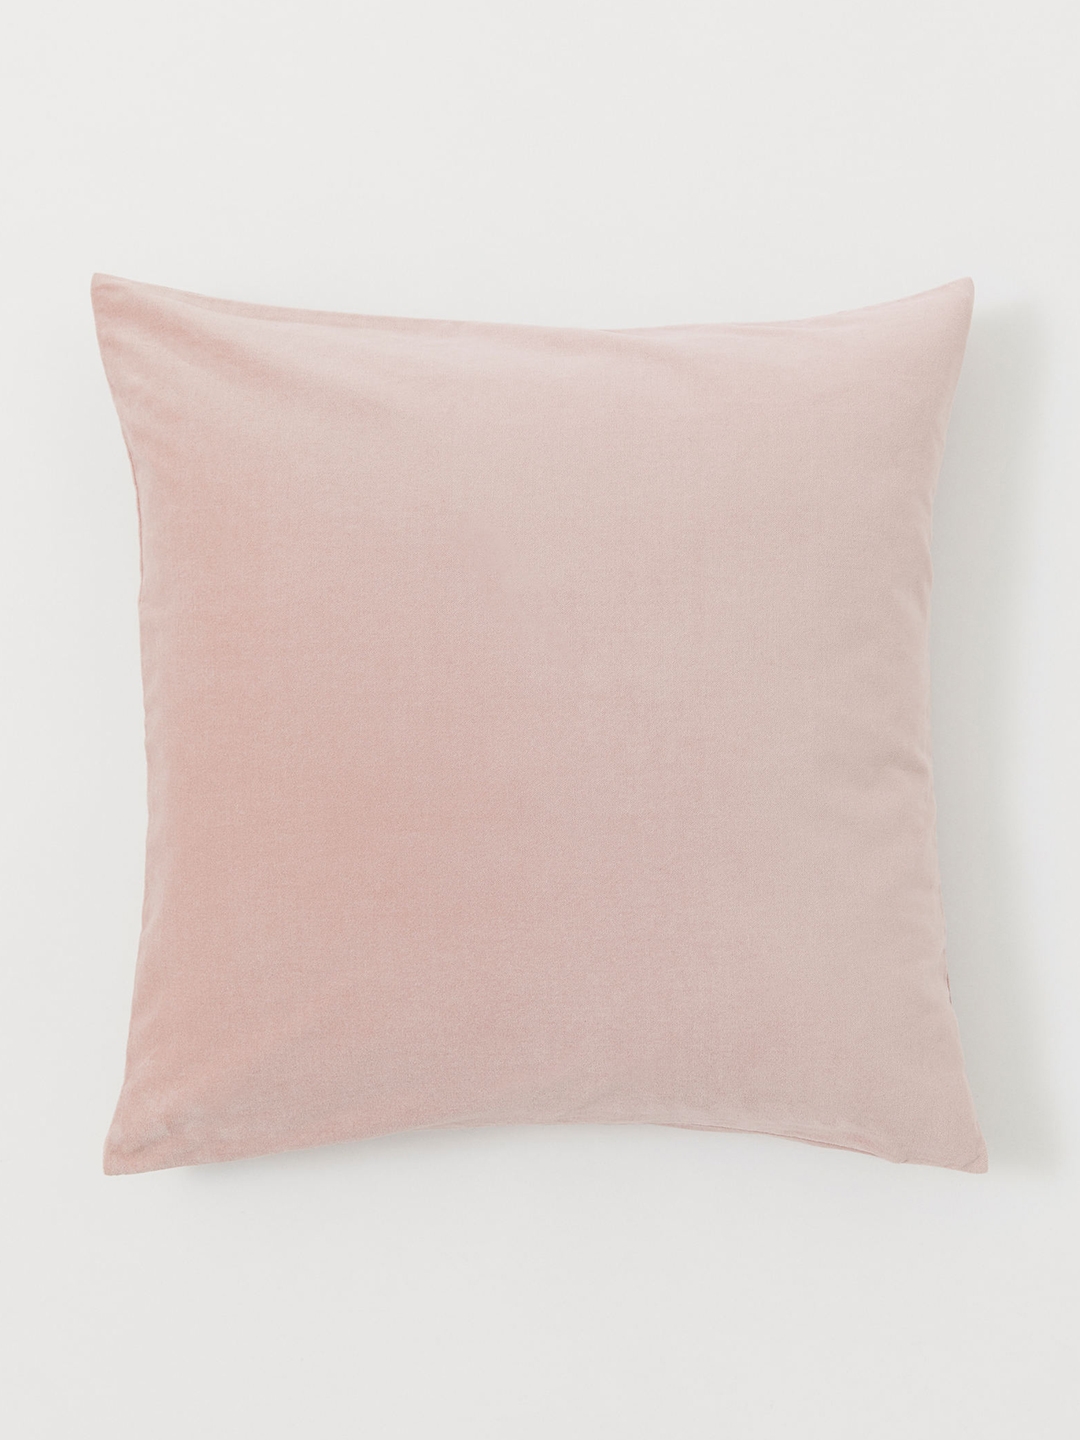 H&M Pink Solid Cotton Velvet Cushion Cover